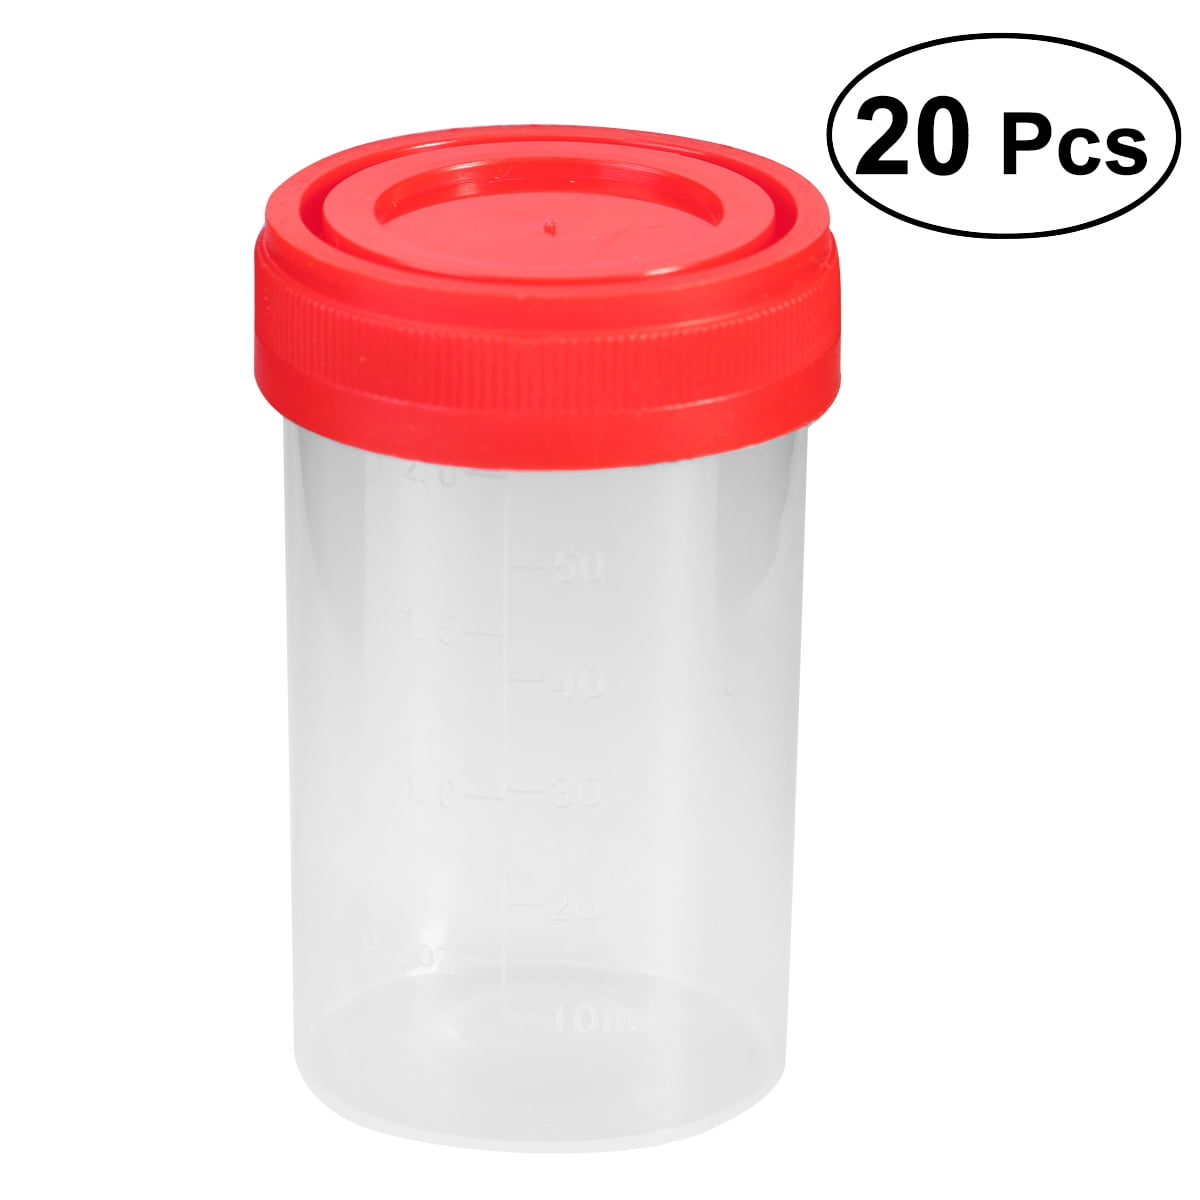 Scicalife 10pc Specimen Cup Disposable Specimen Container Stool Urine Collection Cup with Lid for Home Hospital